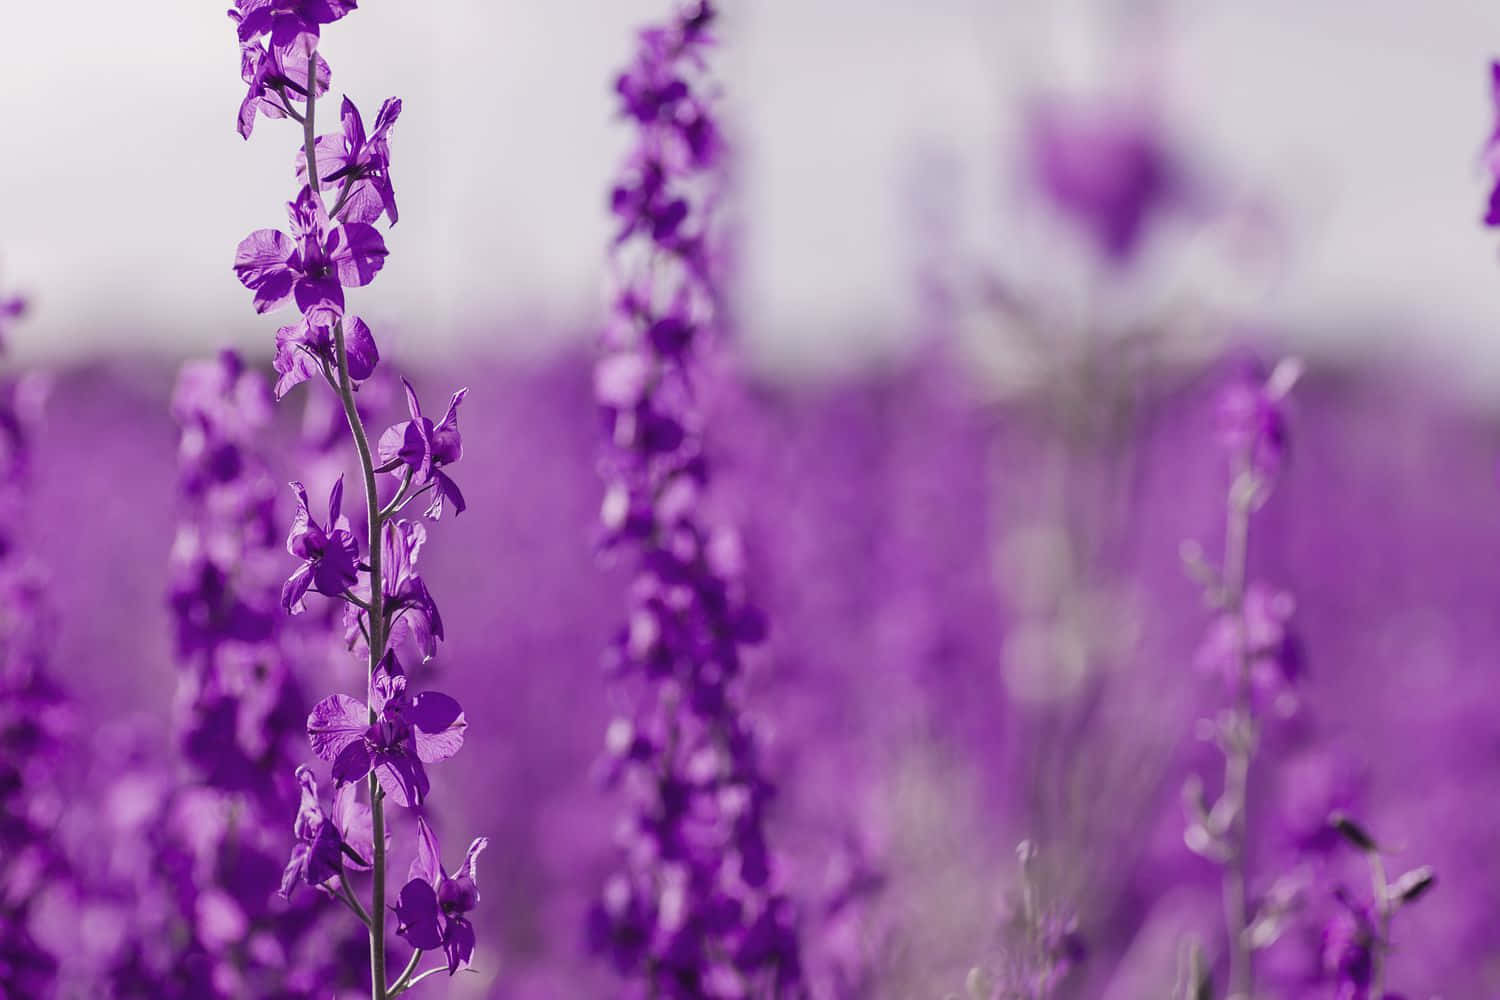 Purple Flowers In A Field With A Blurry Background